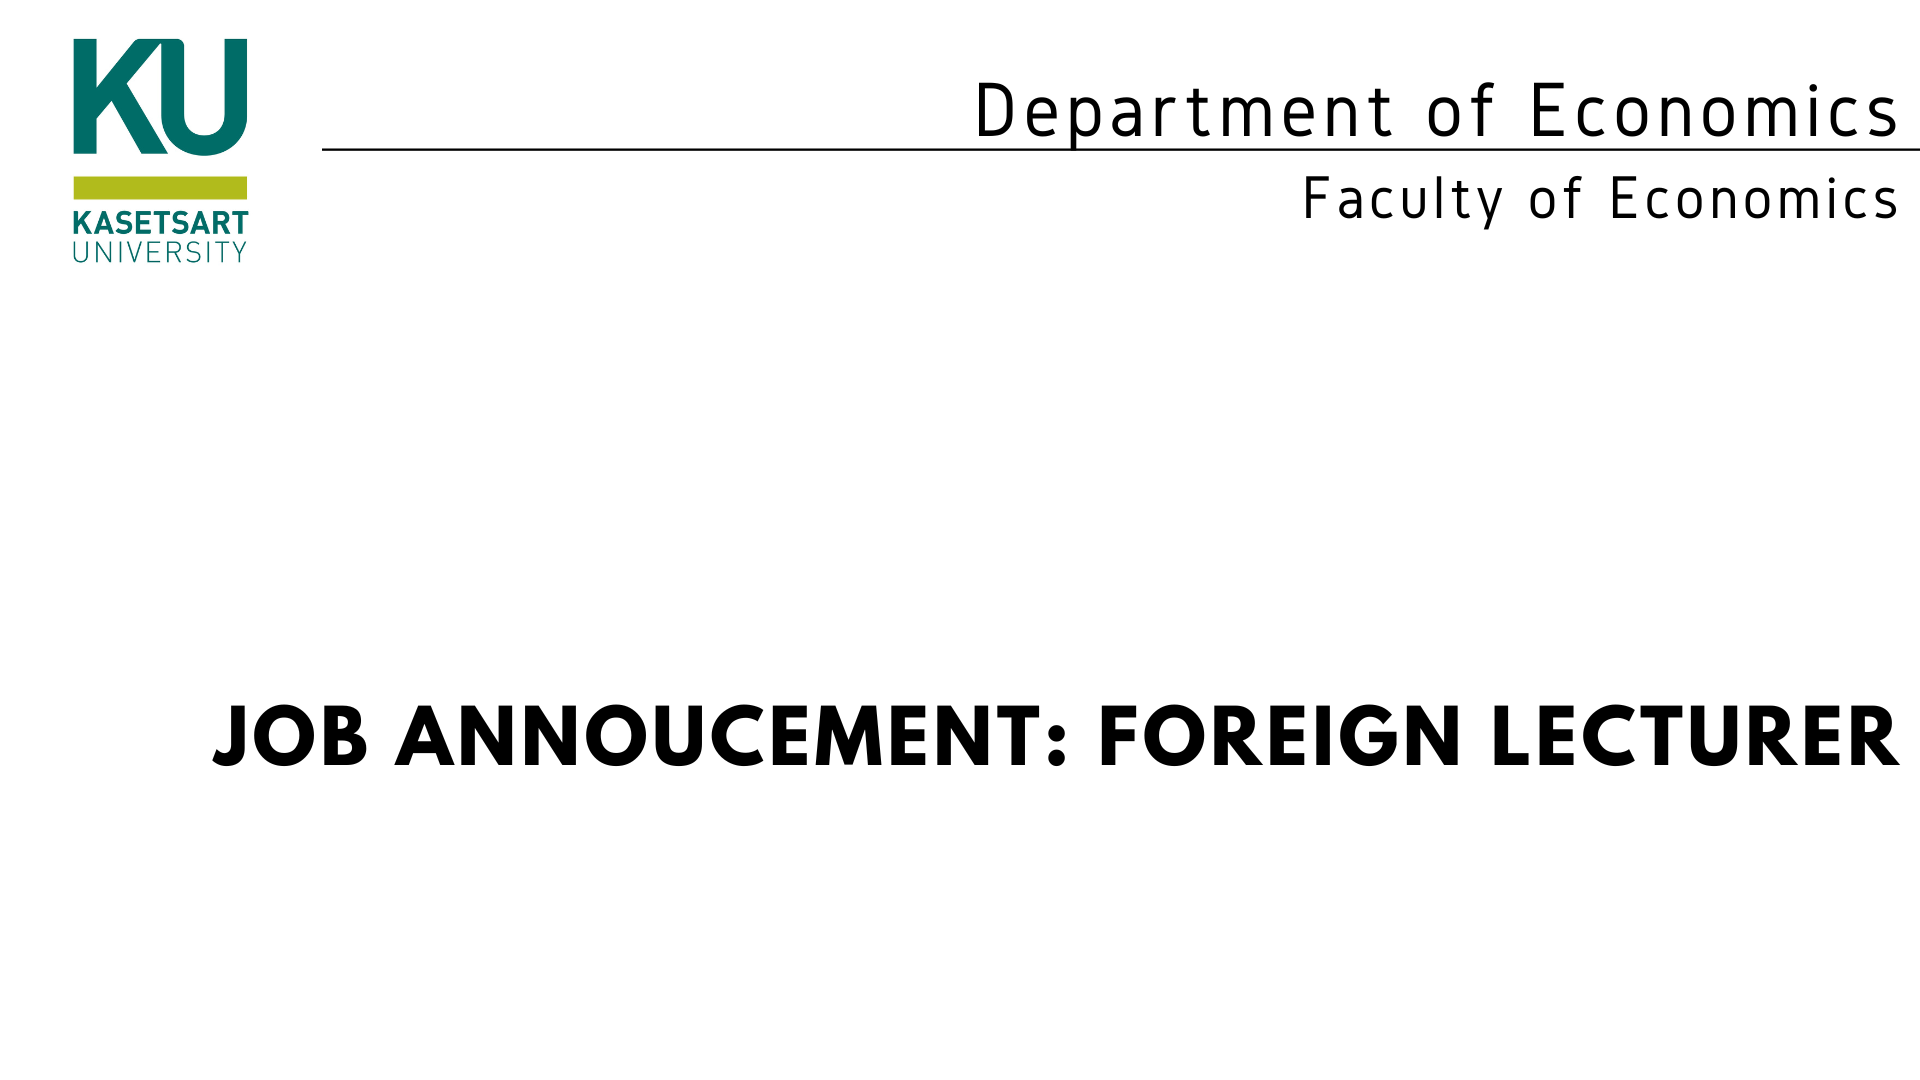 Job Annoucement: Foreign Lecturer from now on until Tuesday 31 January 2023